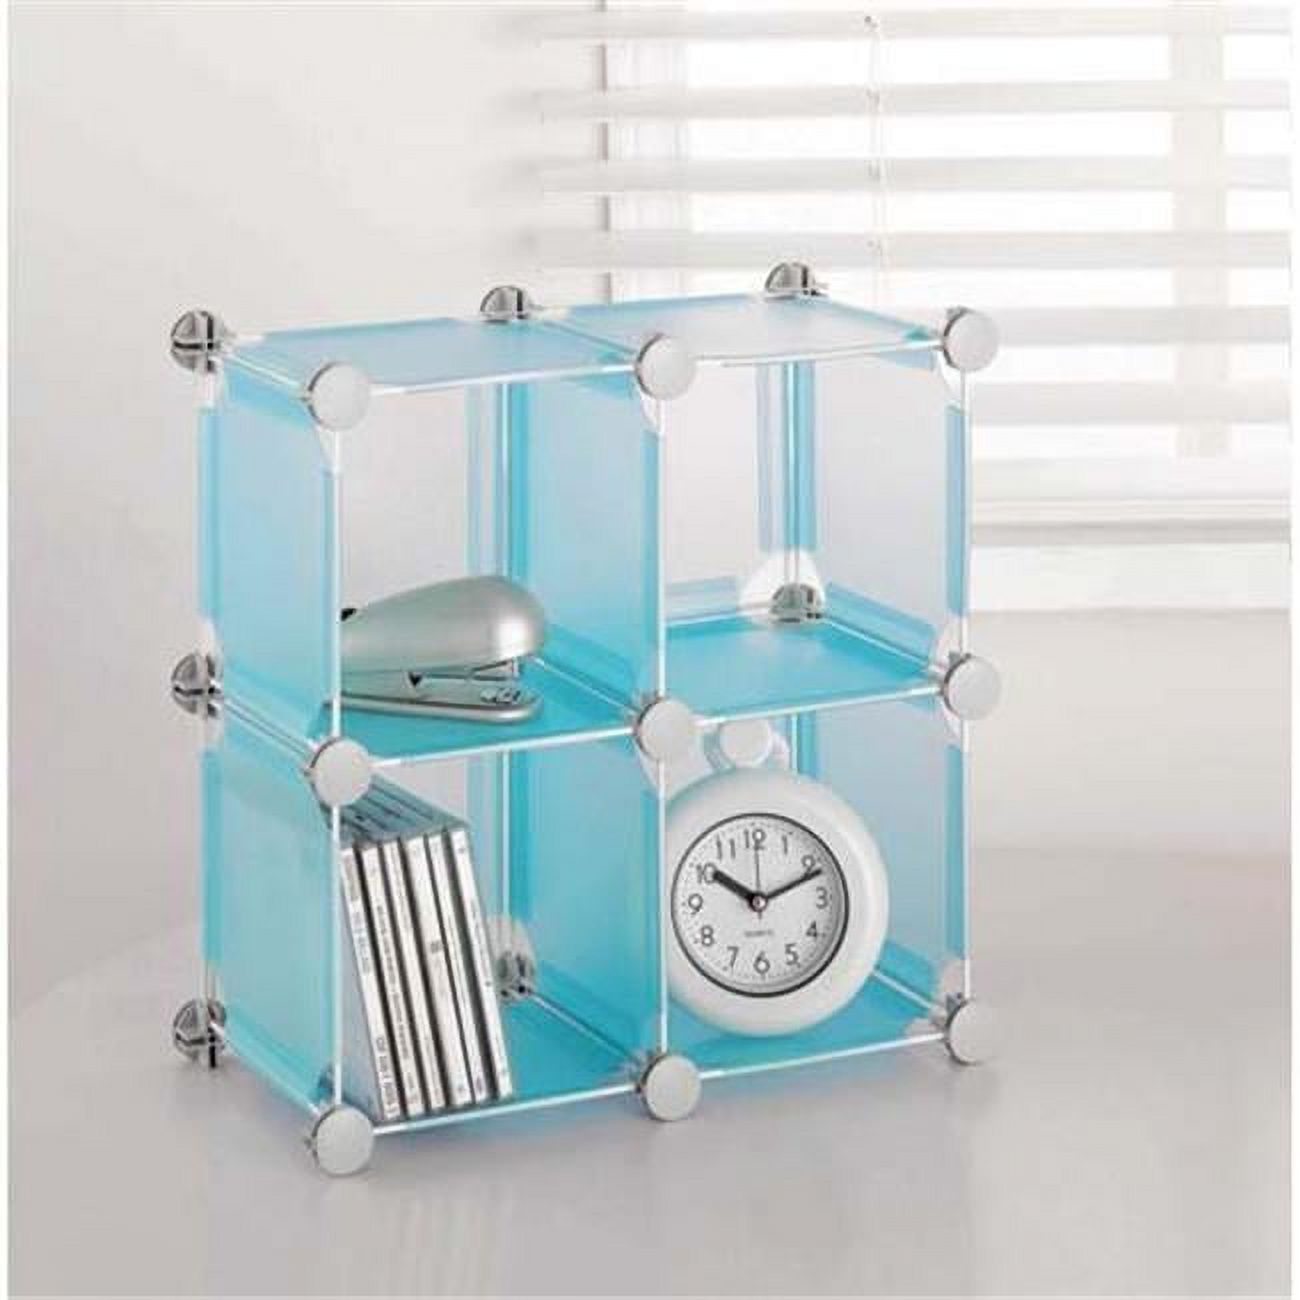 Organize it All 15994W-1 Small Blue Translucent Cubes - image 1 of 2